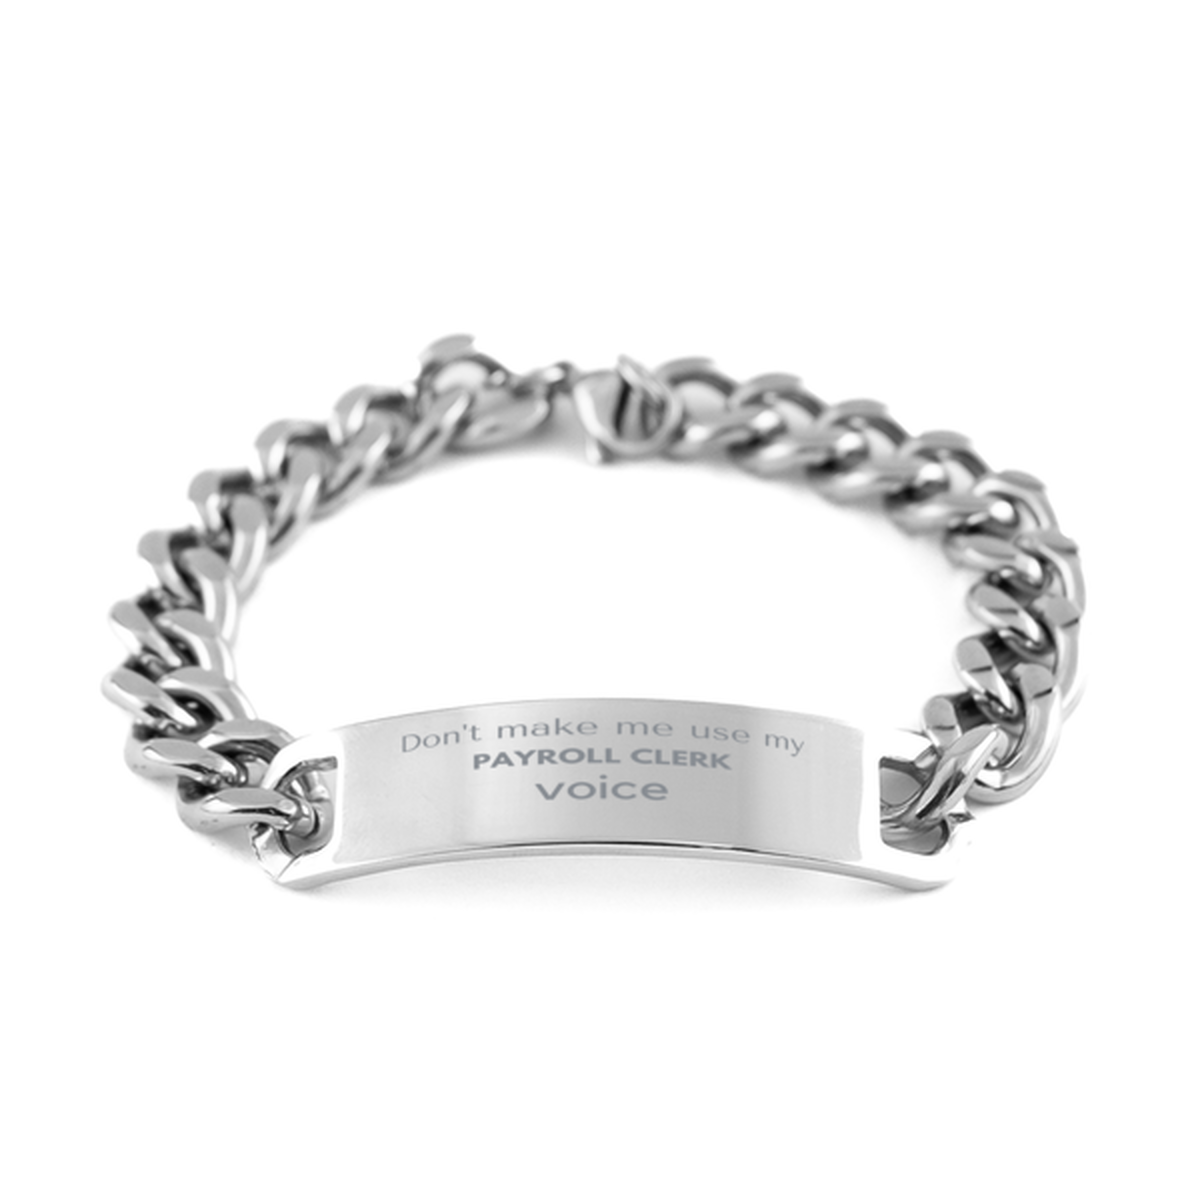 Don't make me use my Payroll Clerk voice, Sarcasm Payroll Clerk Gifts, Christmas Payroll Clerk Cuban Chain Stainless Steel Bracelet Birthday Unique Gifts For Payroll Clerk Coworkers, Men, Women, Colleague, Friends